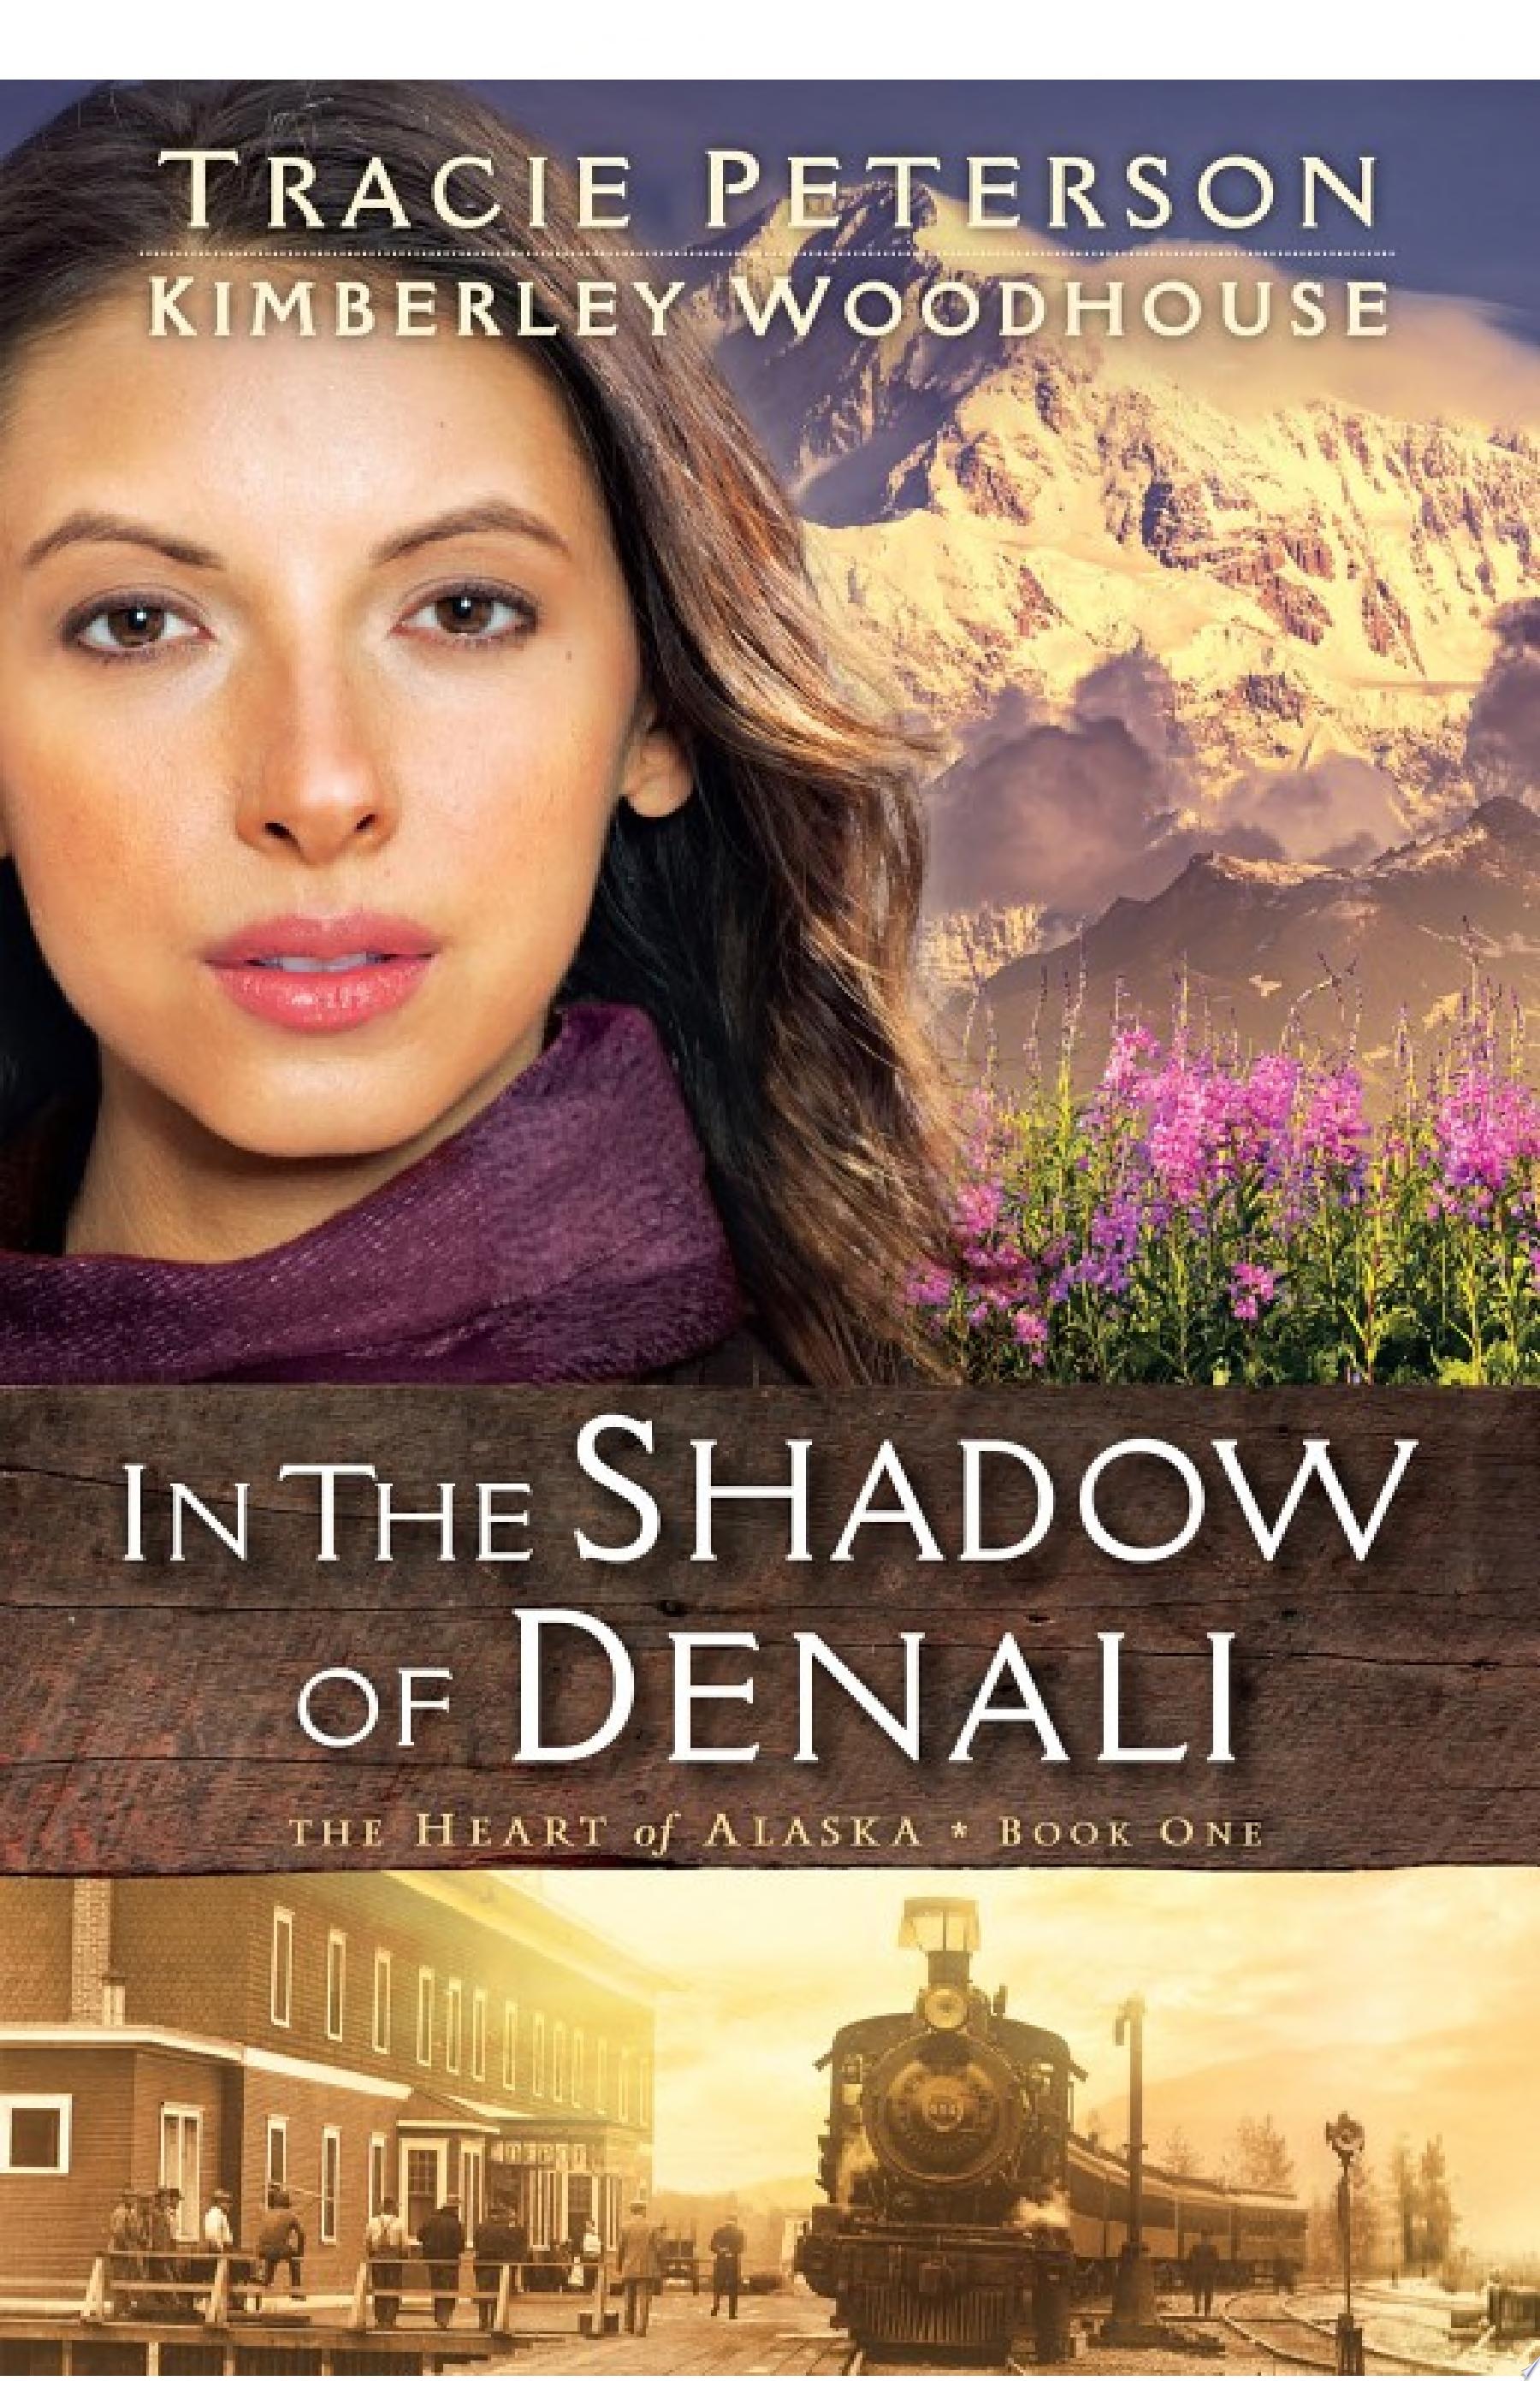 Image for "In the Shadow of Denali (The Heart of Alaska Book #1)"